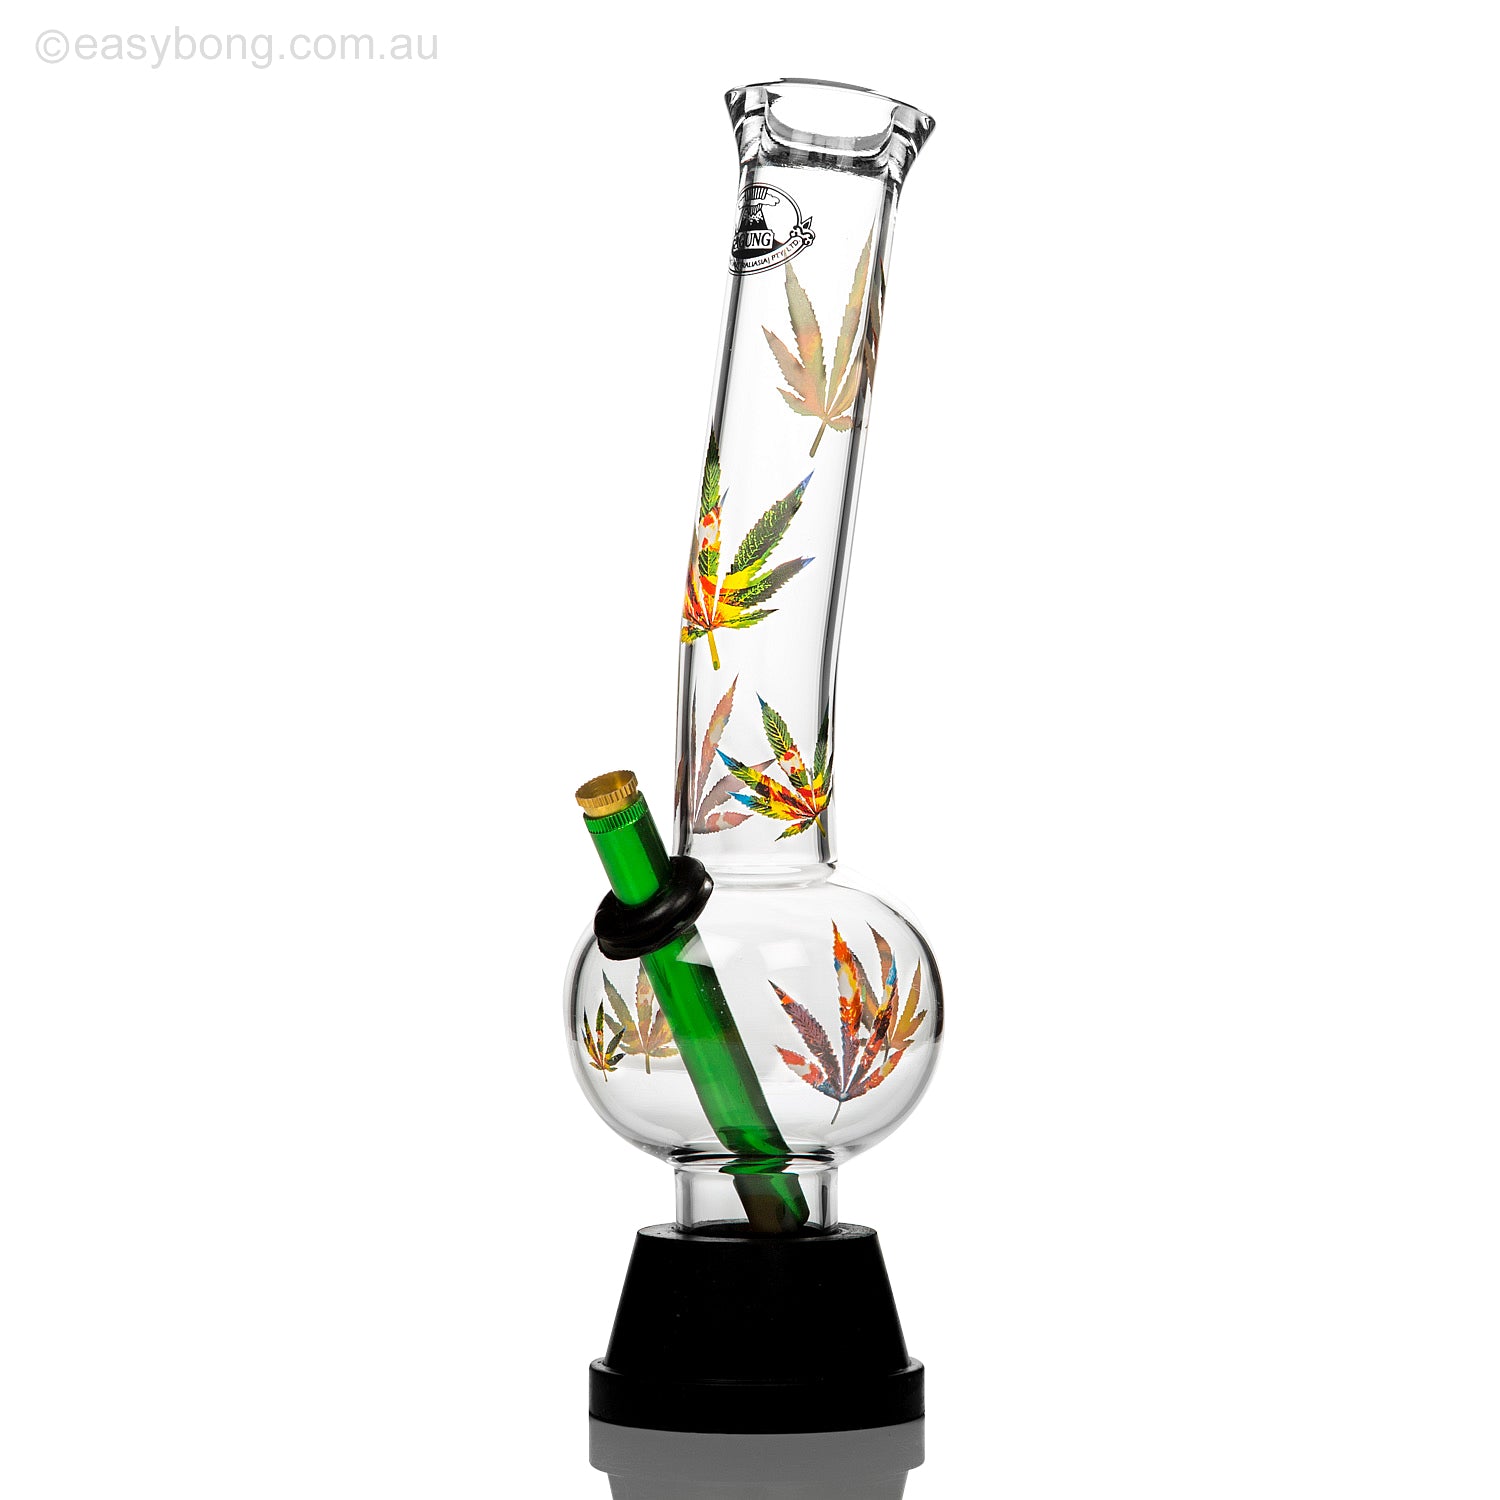 Agung model 1193 bubble bong with weed leaf decals.